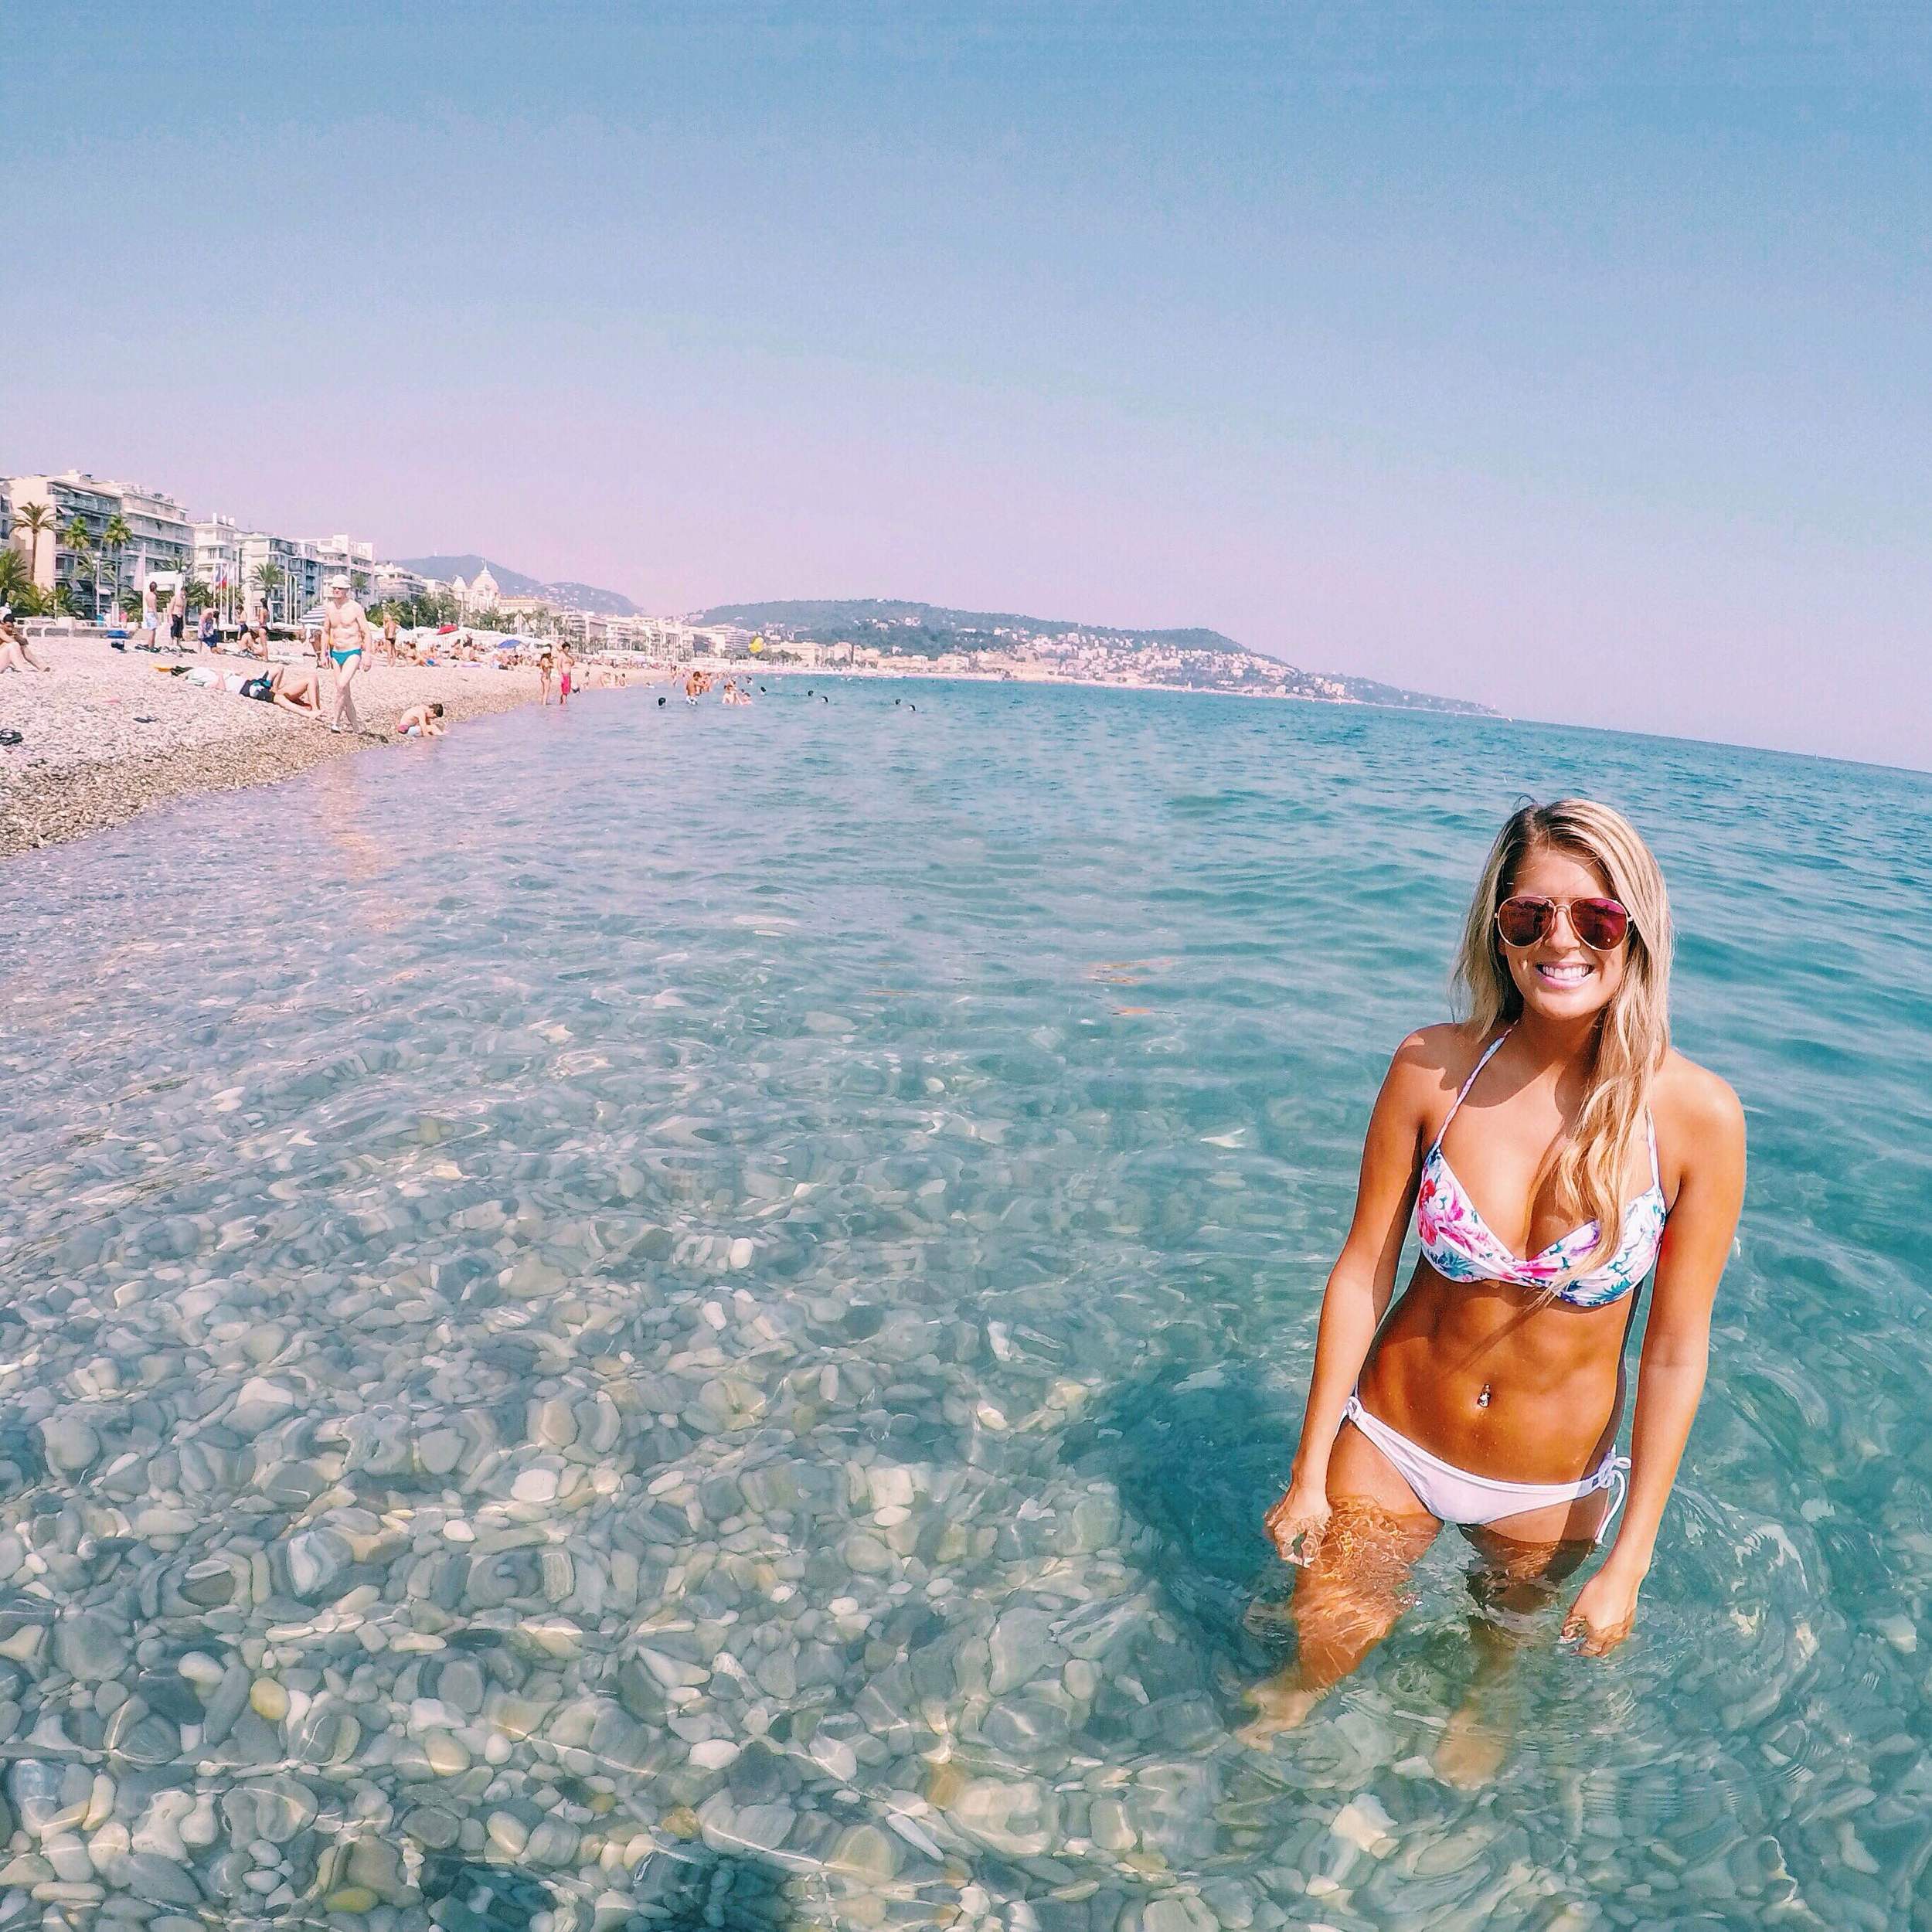 Blond Girl at the Beach in Nice - Côte d'Azur - South of France (French Riviera)